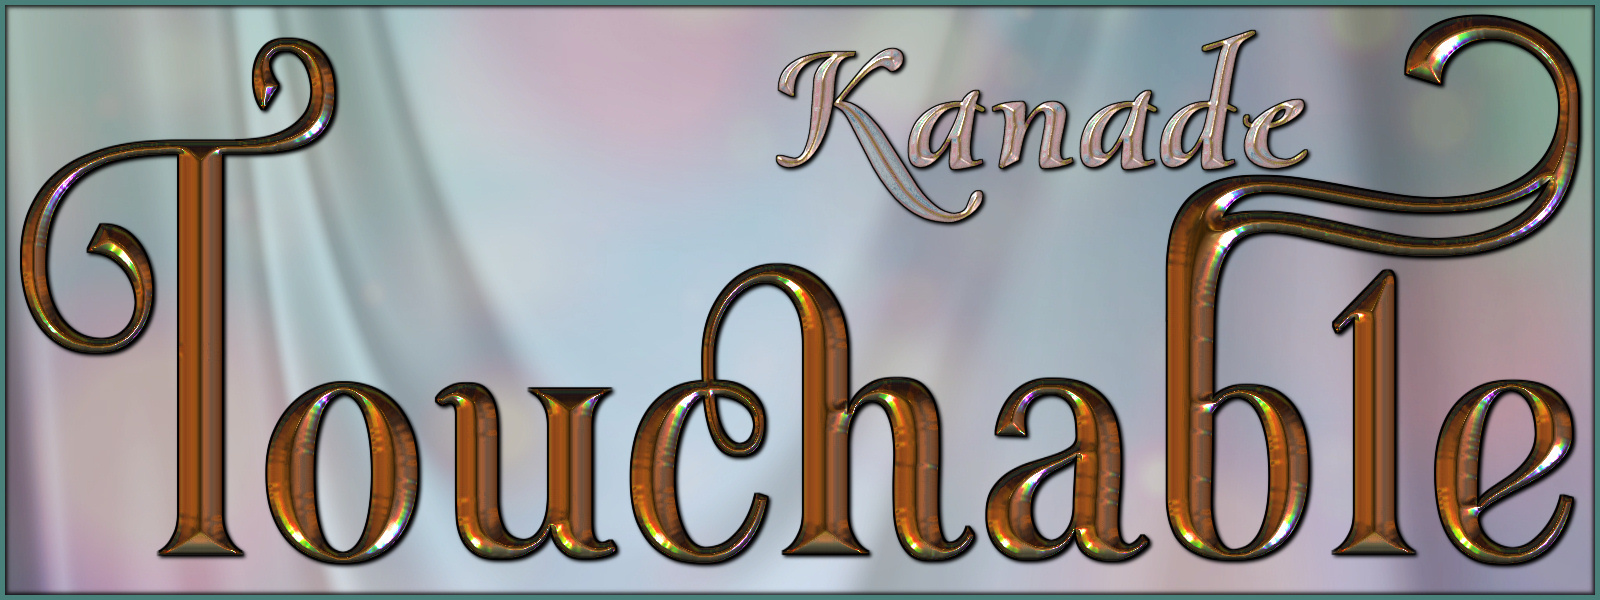 Touchable Kanade by: ~Wolfie~, 3D Models by Daz 3D